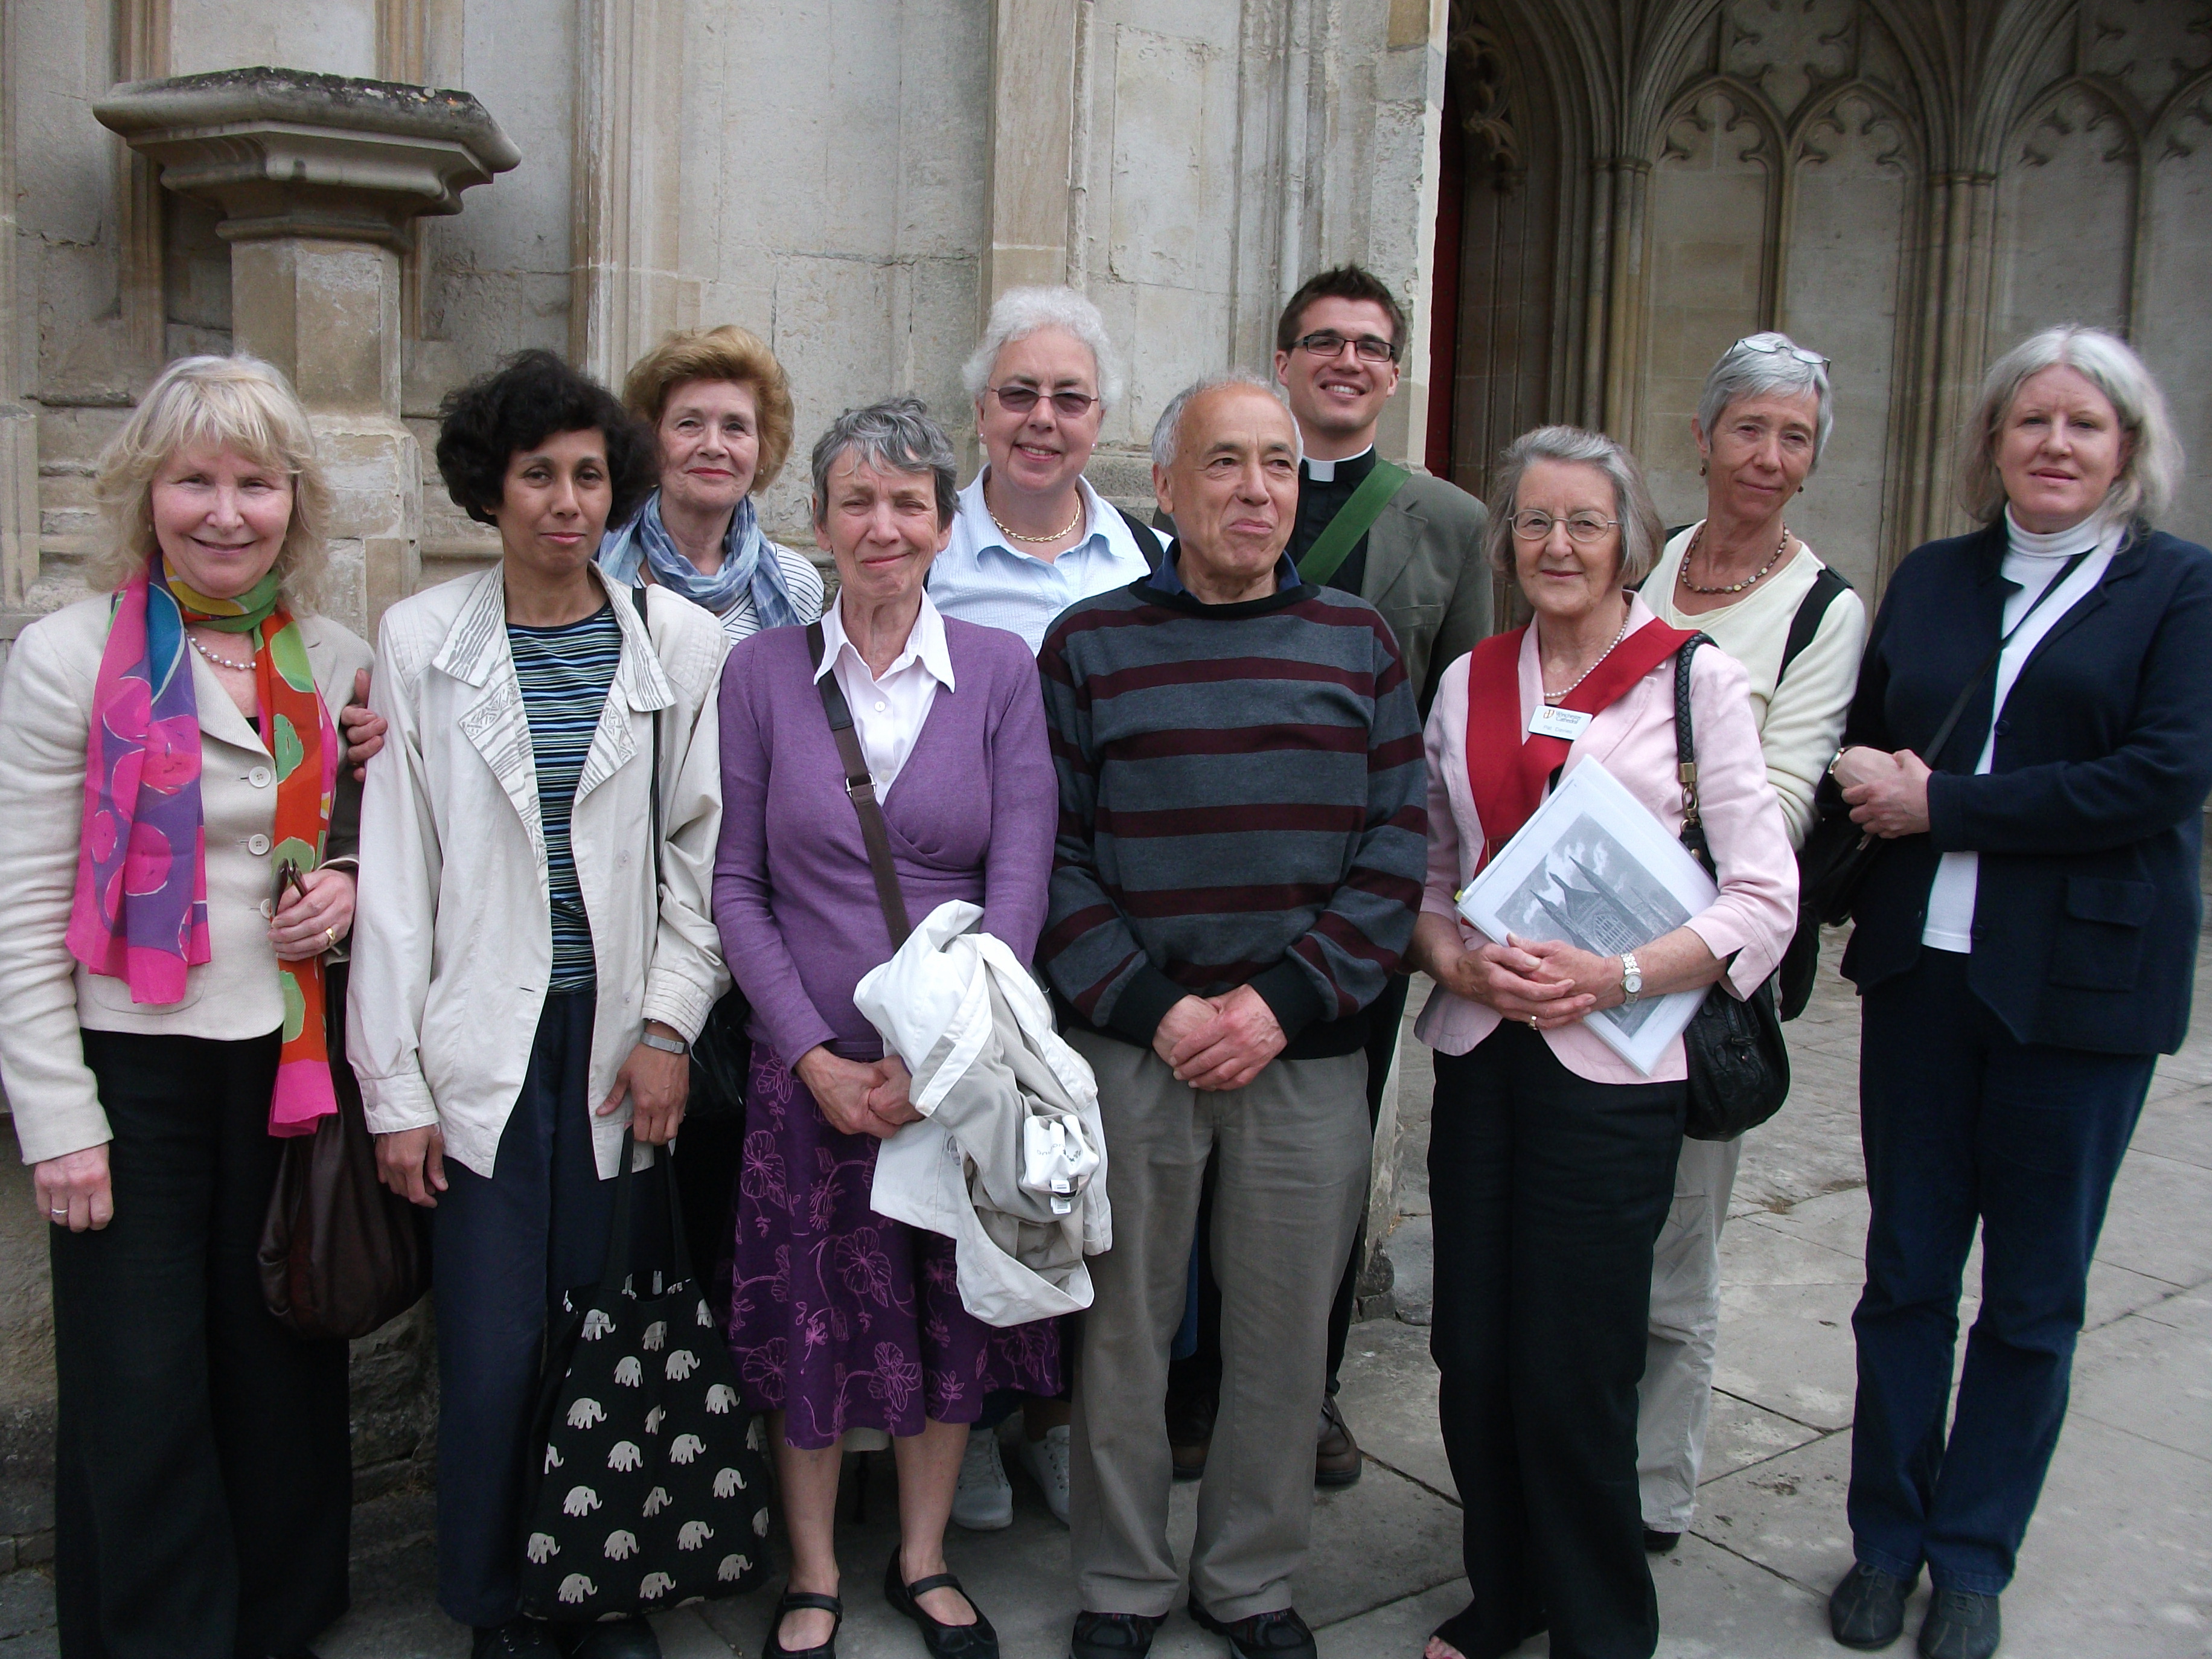 Outside Winchester Cathedral